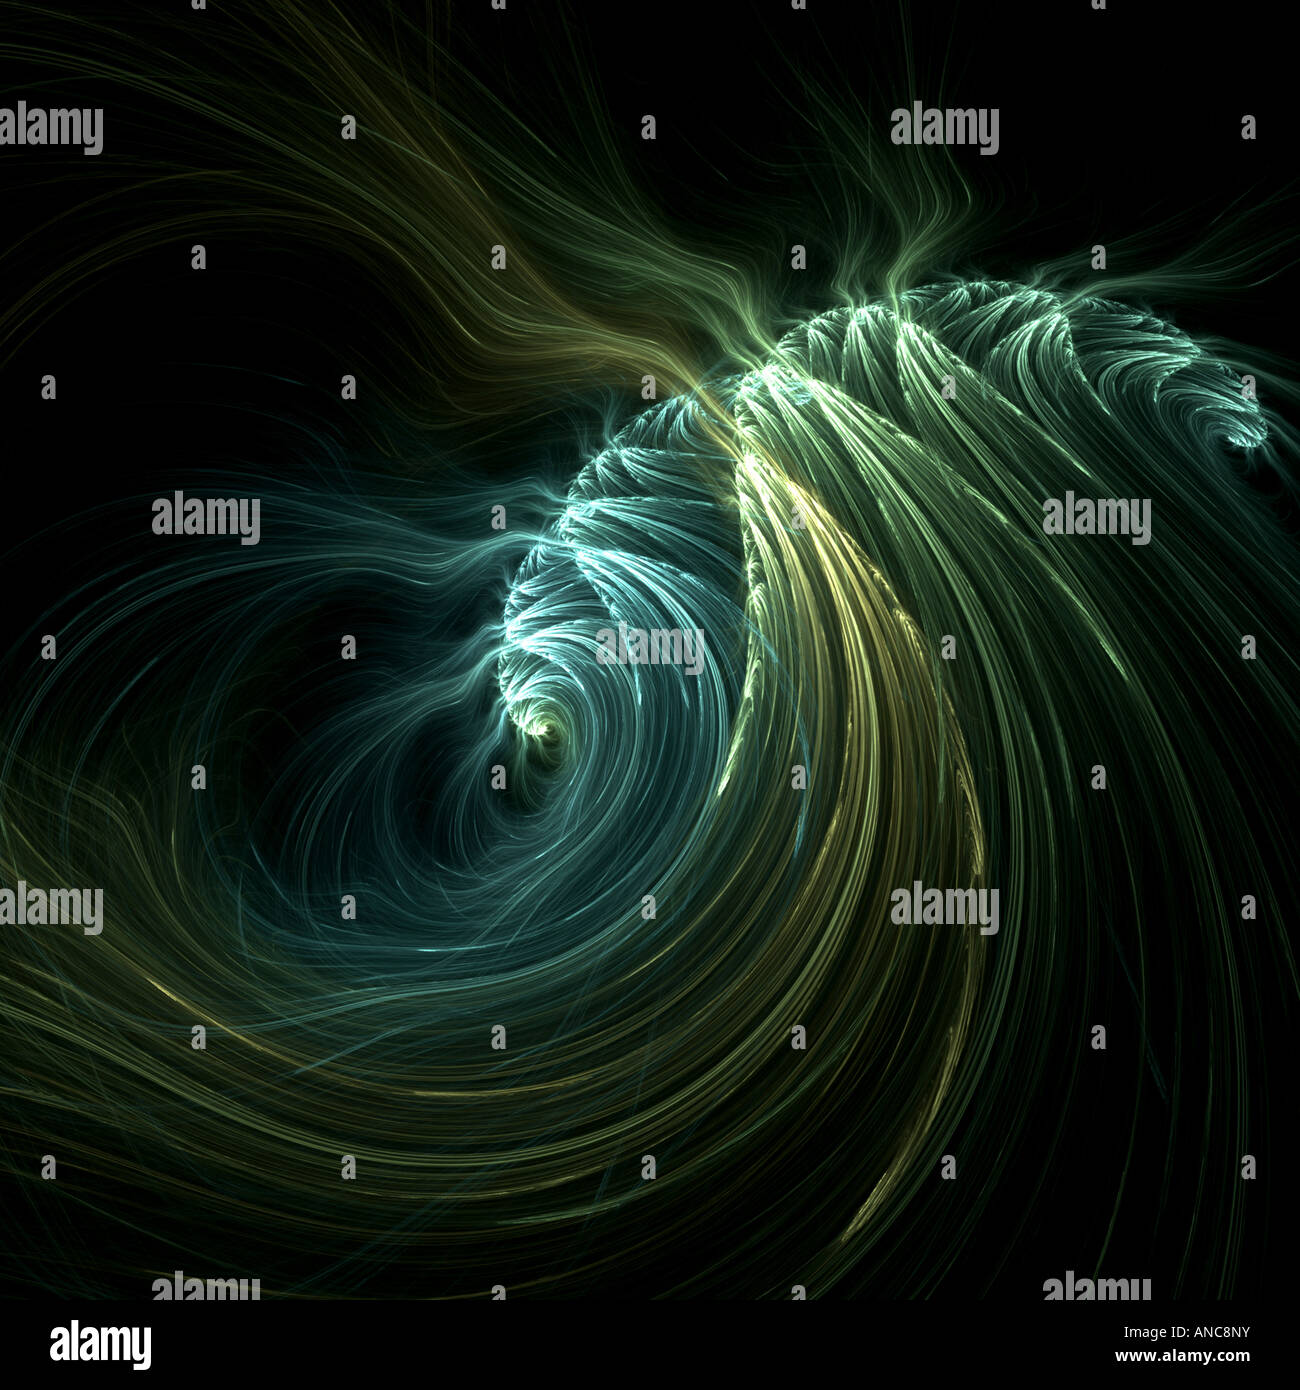 Abstract fractal image resembling a large wave Stock Photo